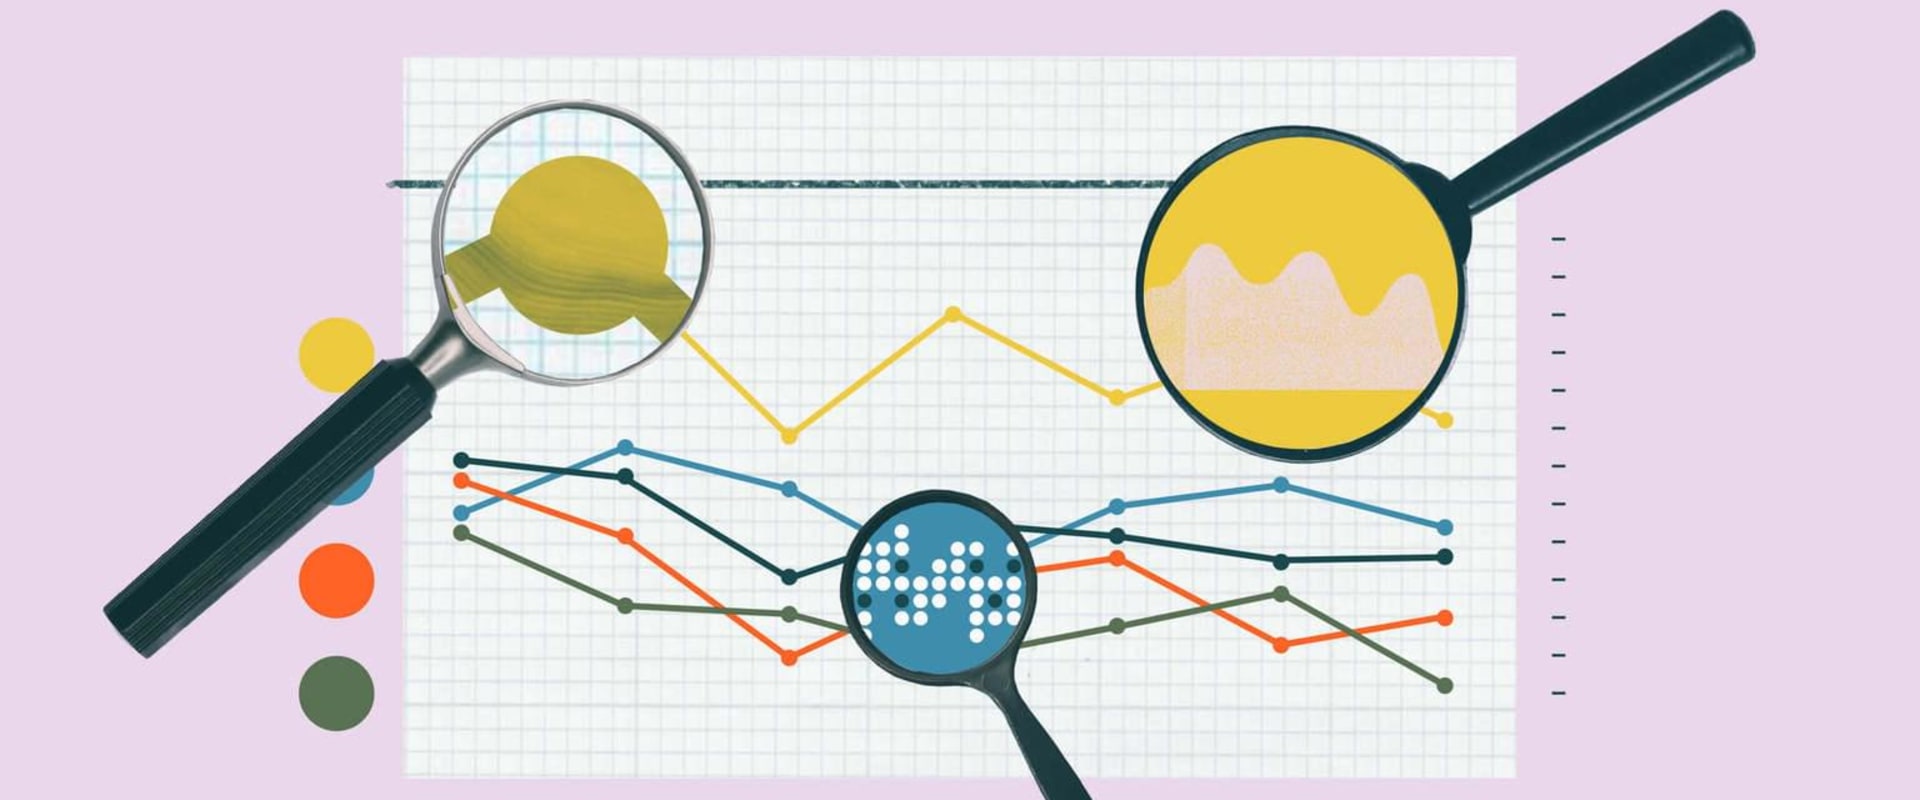 How to Improve Your CRM Strategy Through Data Analysis and Reporting